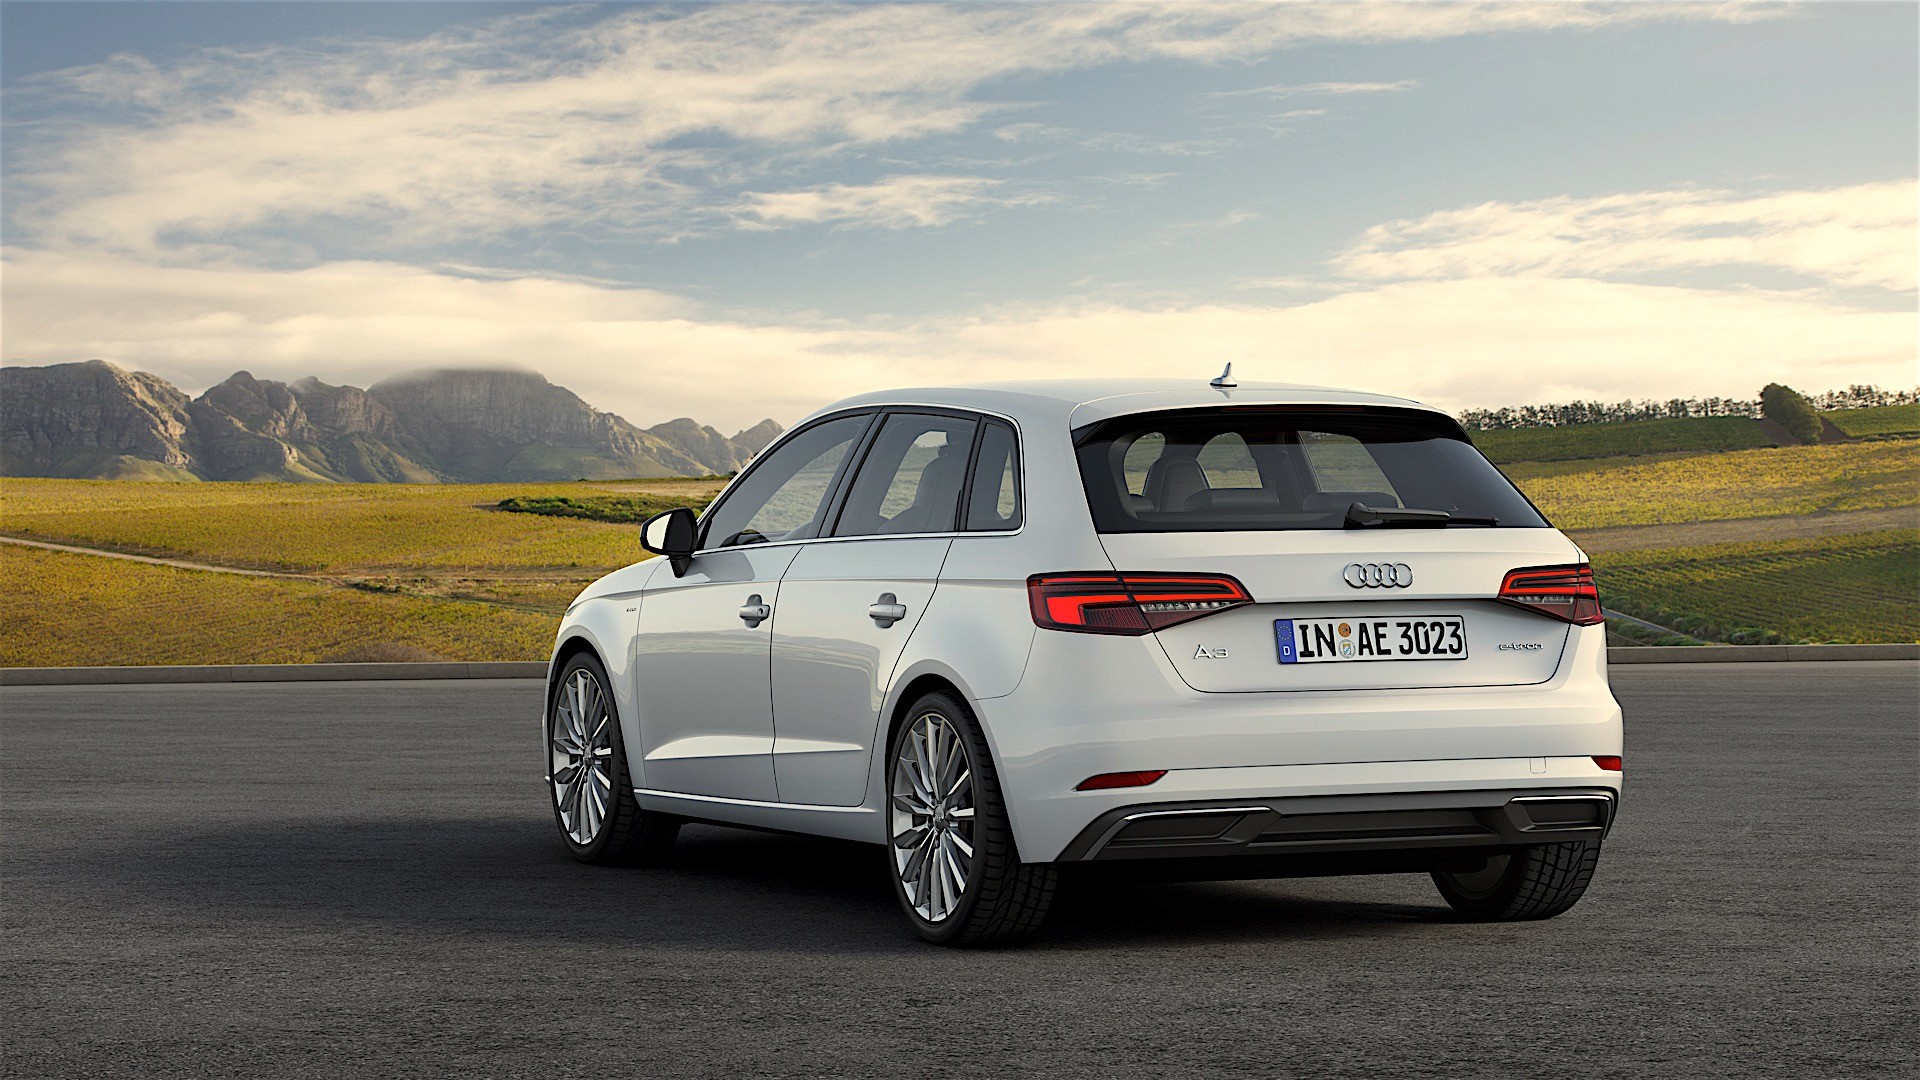 Audi A3 Got a Facelift and Looks like a Smaller A4 but Comes with 